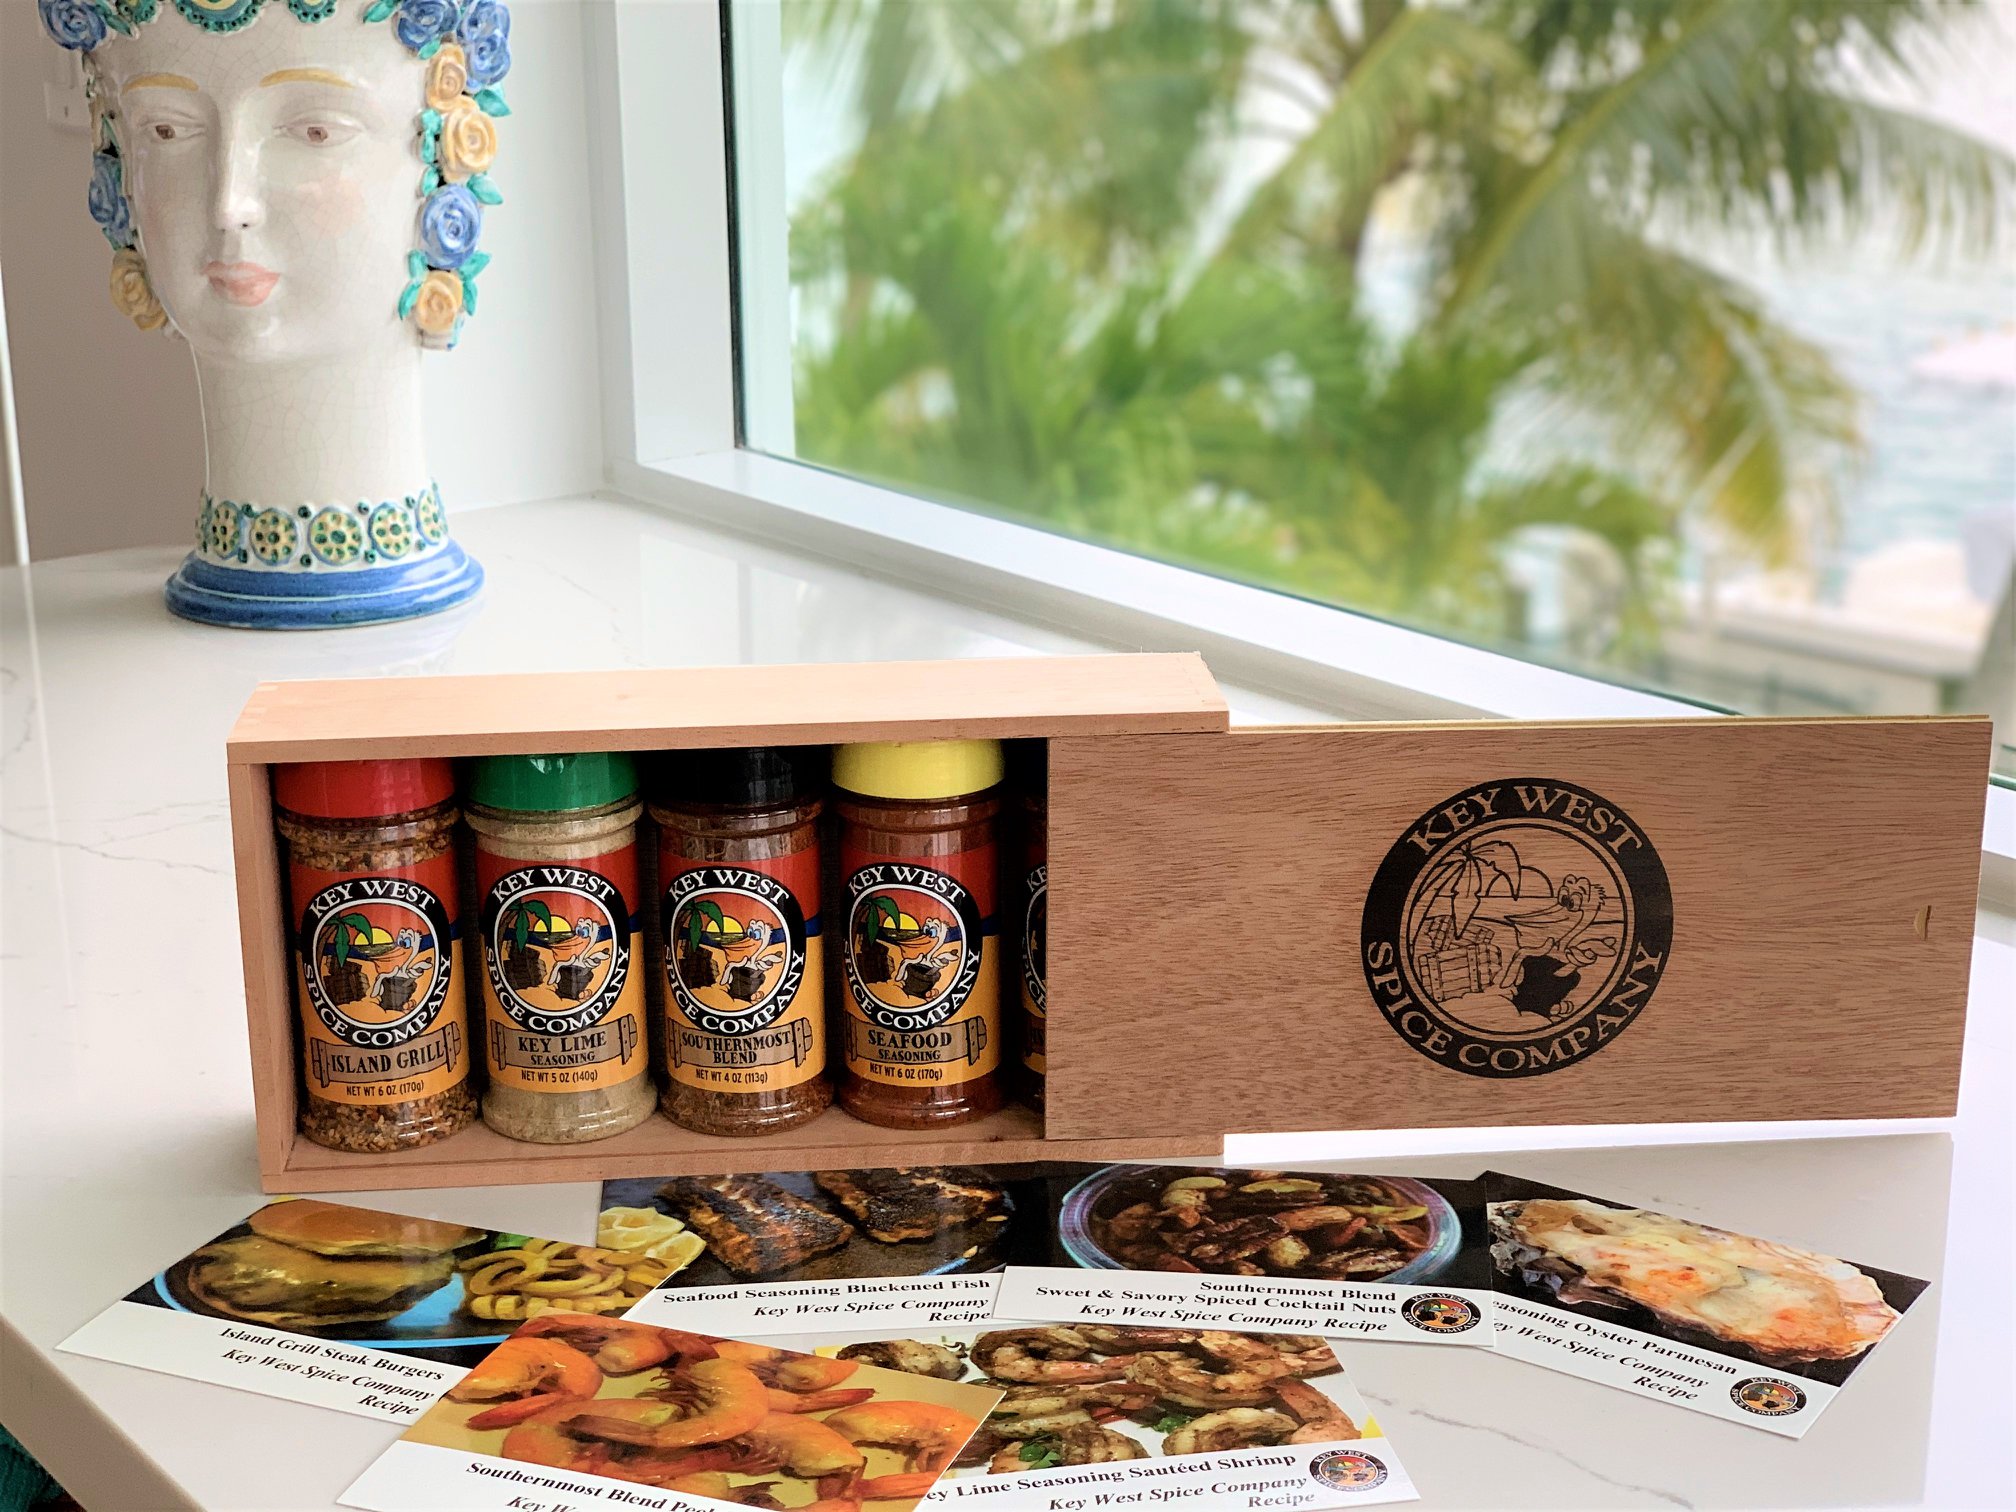 A SPANISH PAELLA GIFT KIT FOR TWO